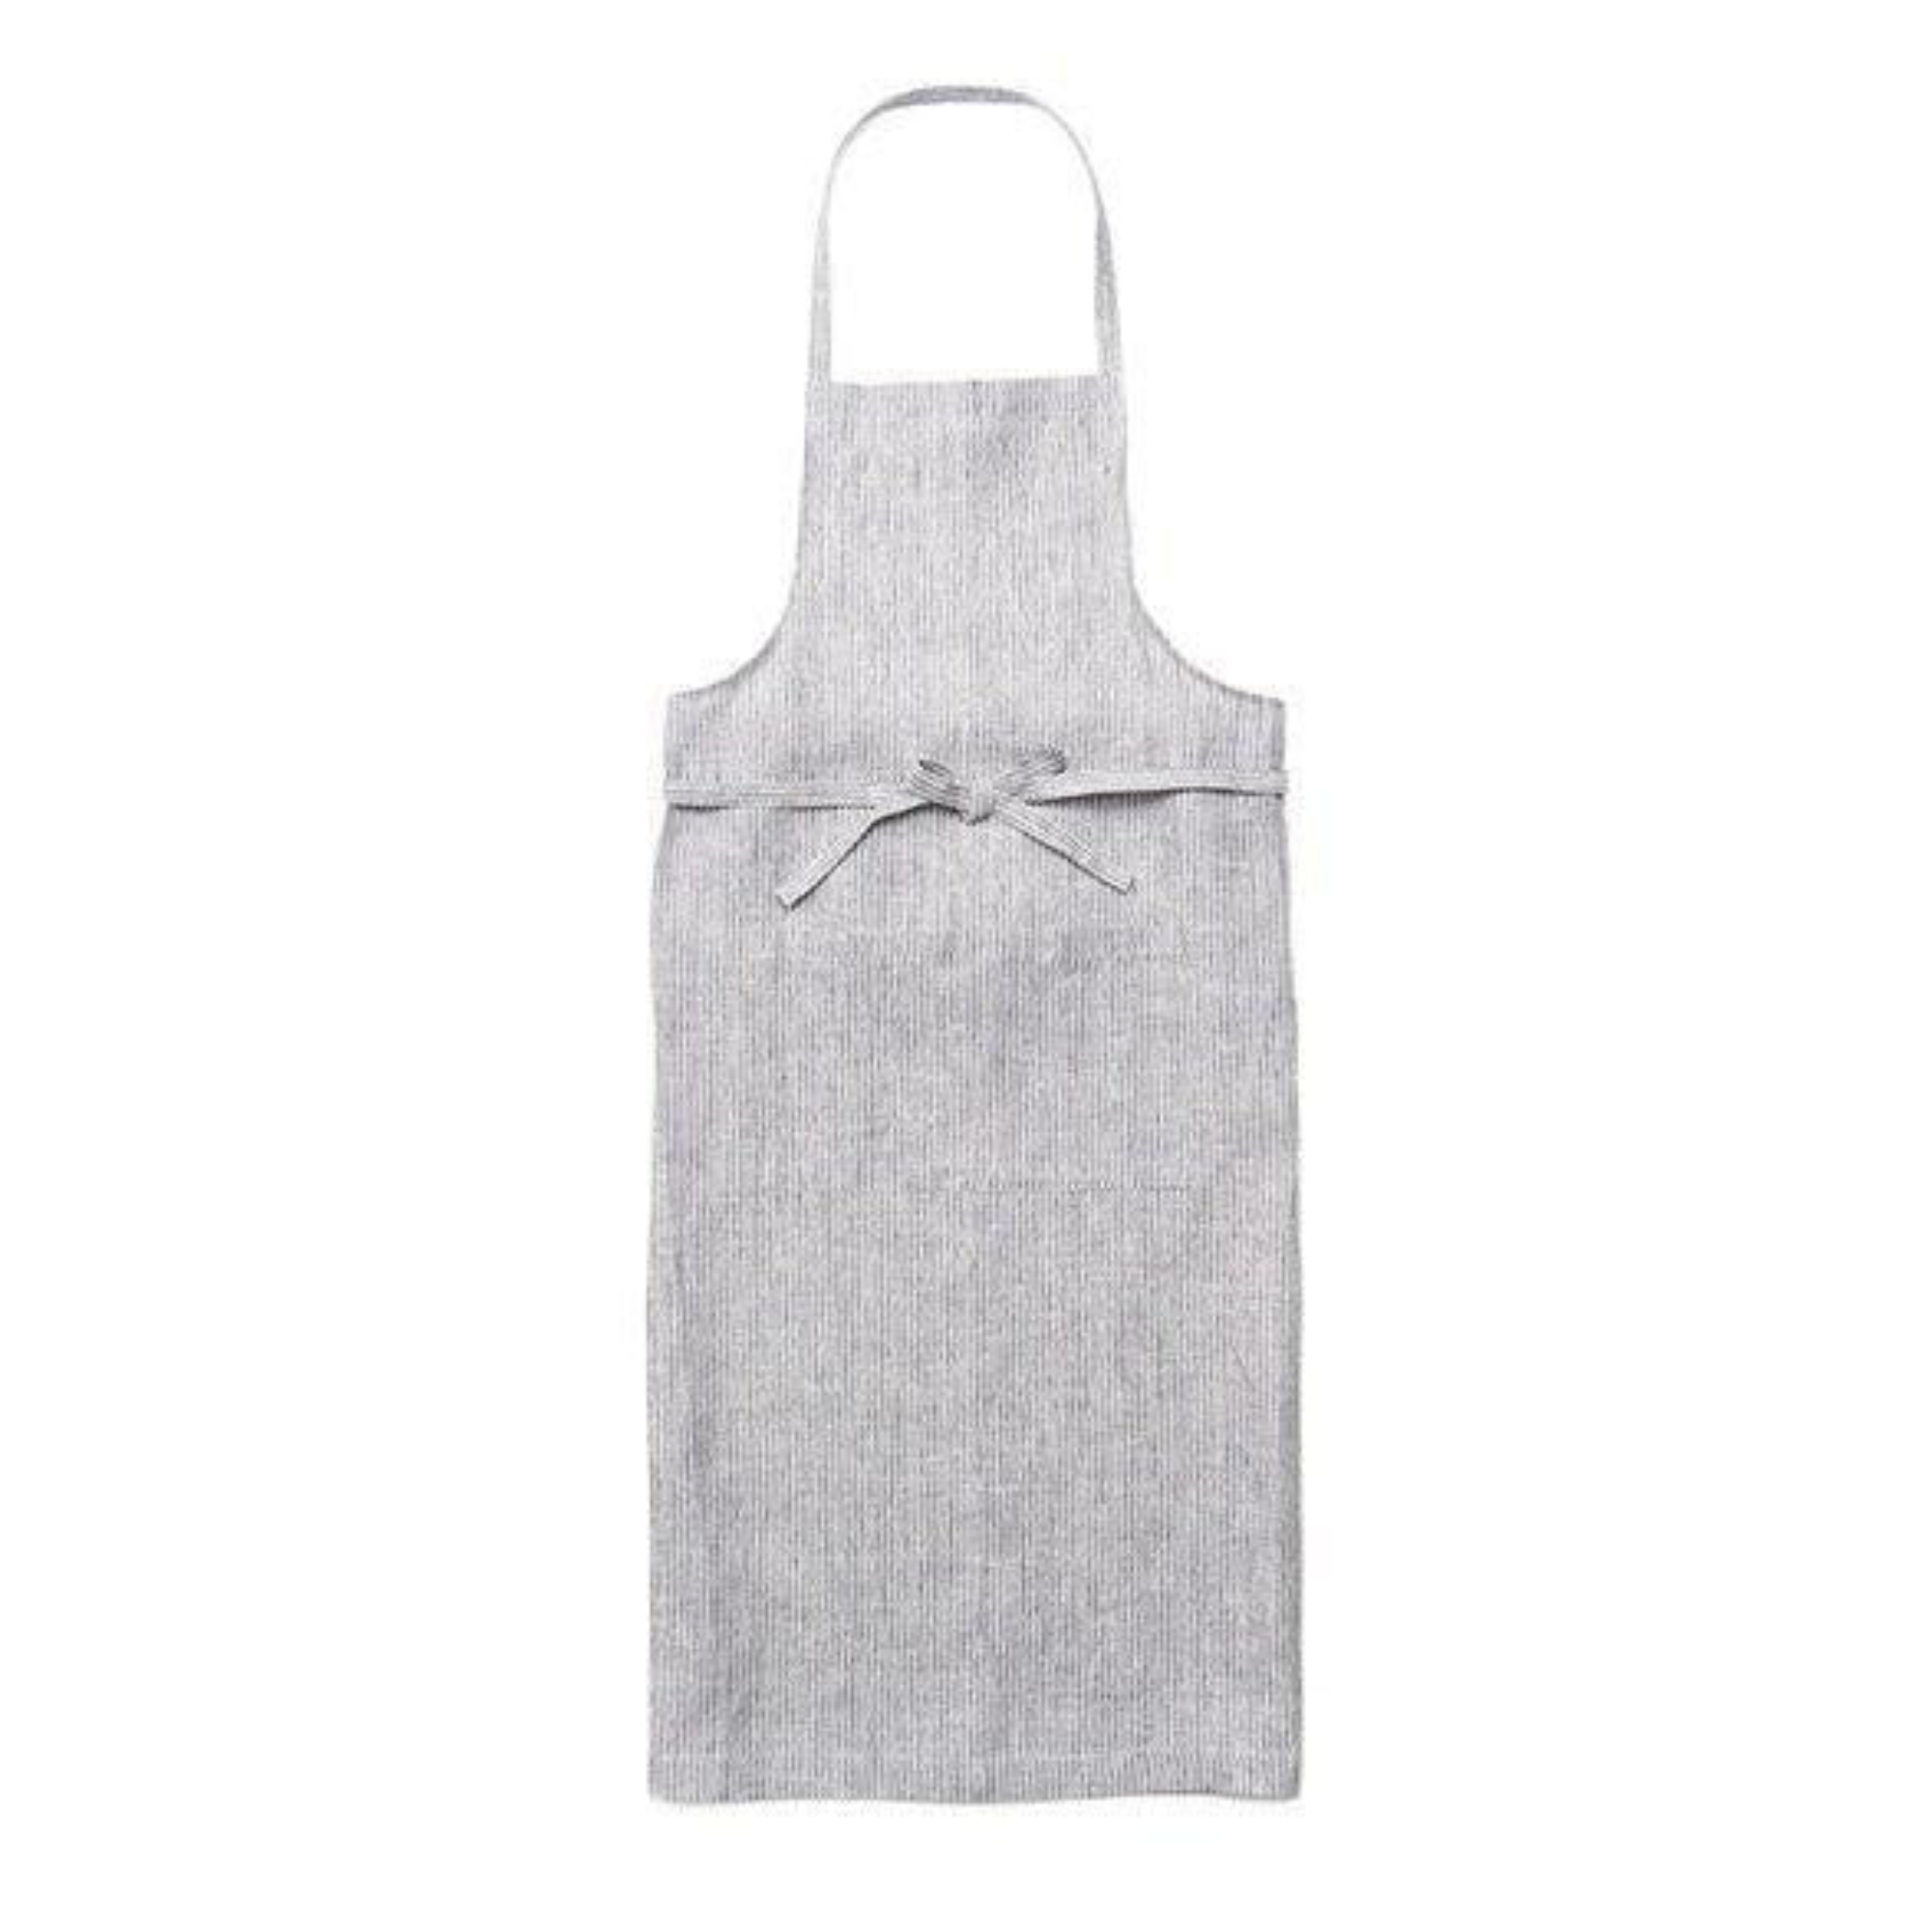 Crafted from durable linen fabric, this grey and white striped apron features two front pockets, making it ideal for kitchen or craft use.